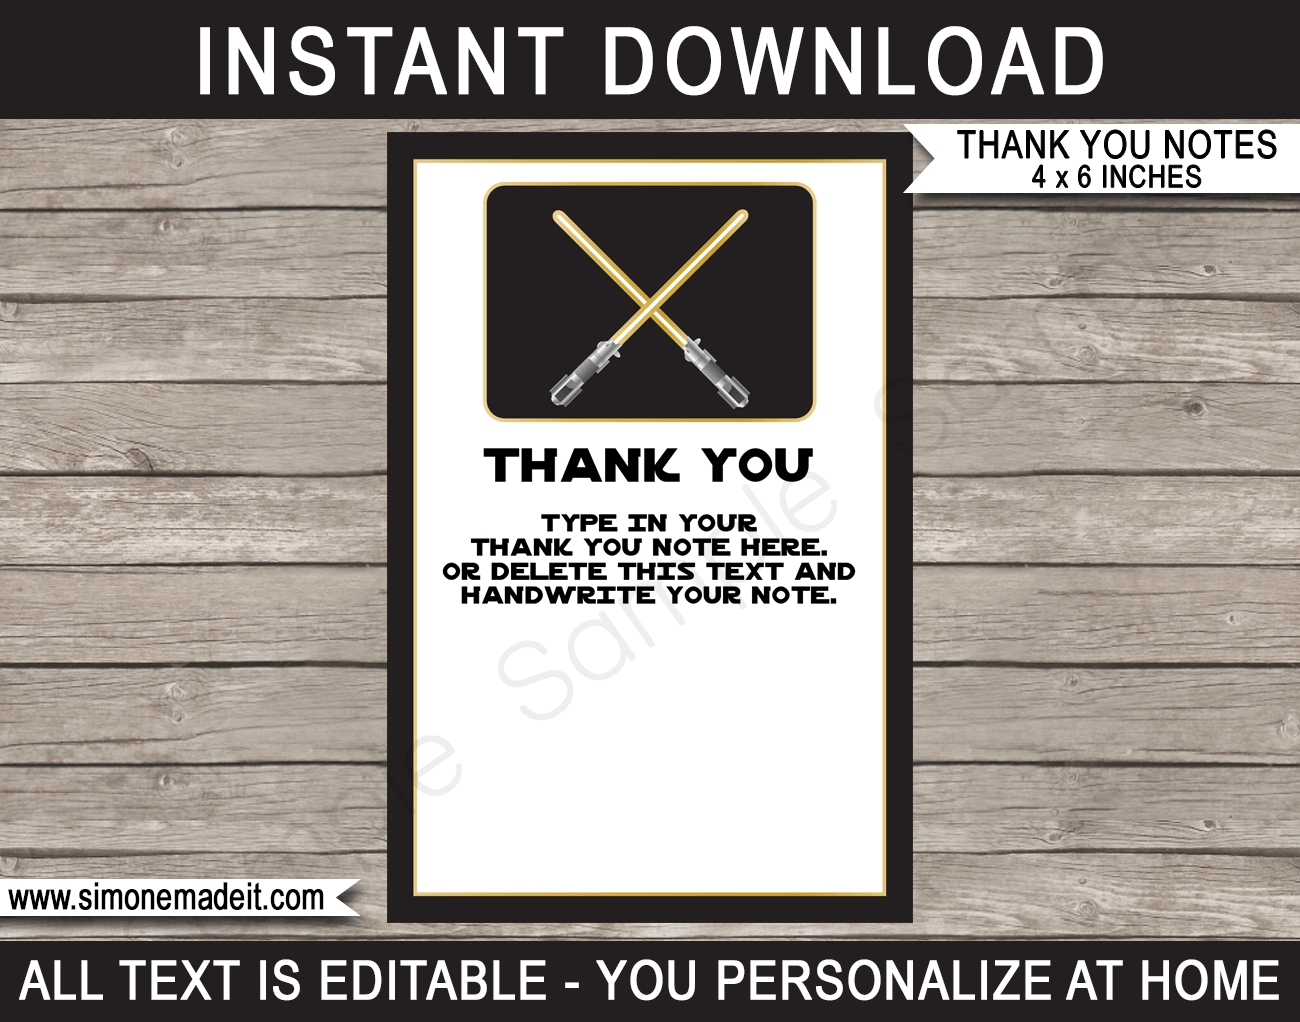 Printable Star Wars Birthday Party Thank You Cards Template - DIY Editable Text - Instant Download via simonemadeit.com